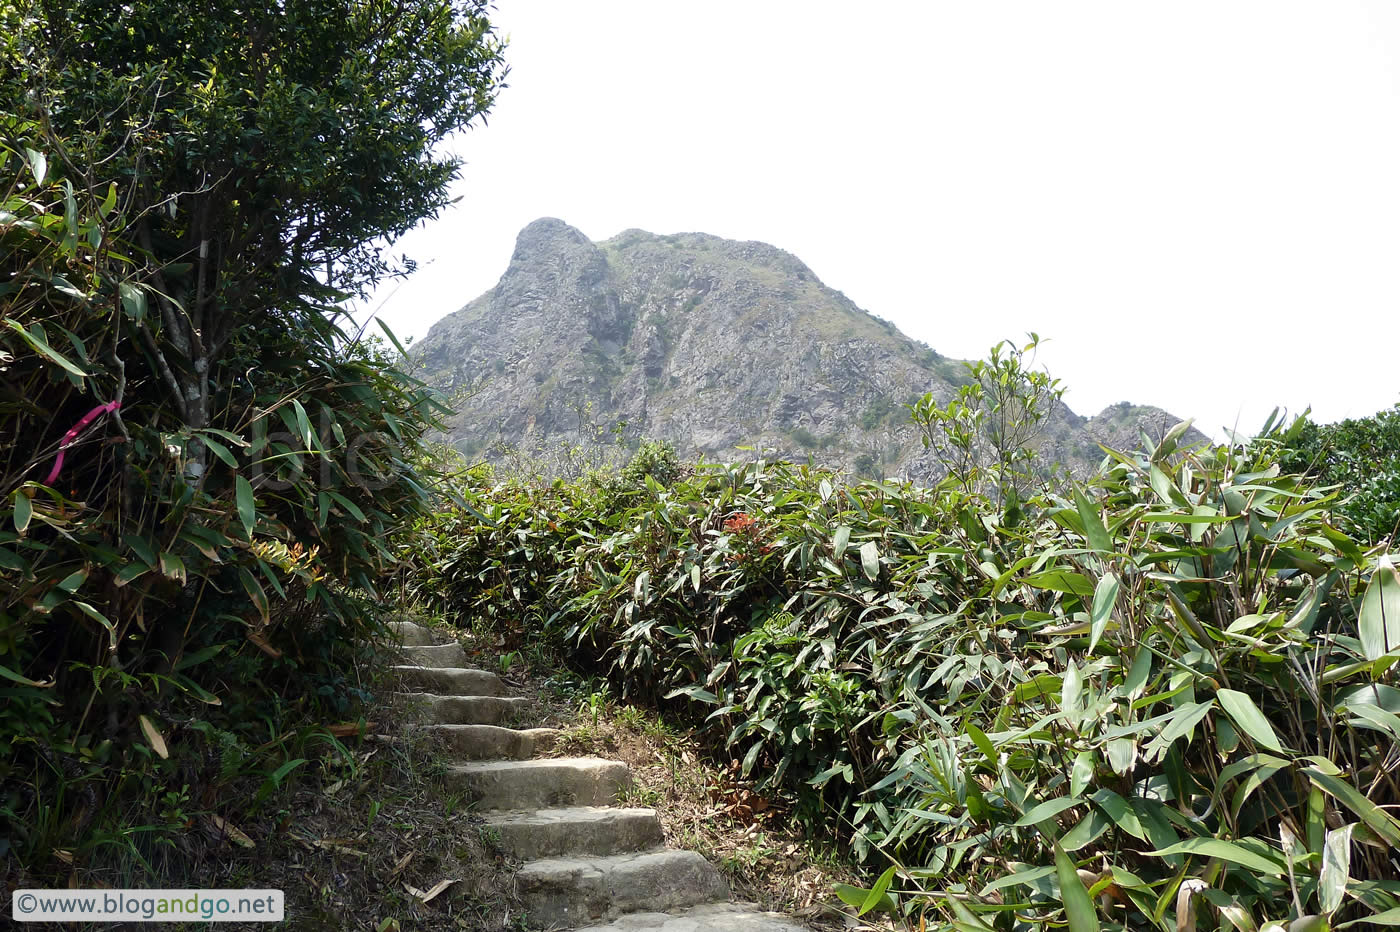 Maclehose Trail 4 - Just past M77 and on go the steps